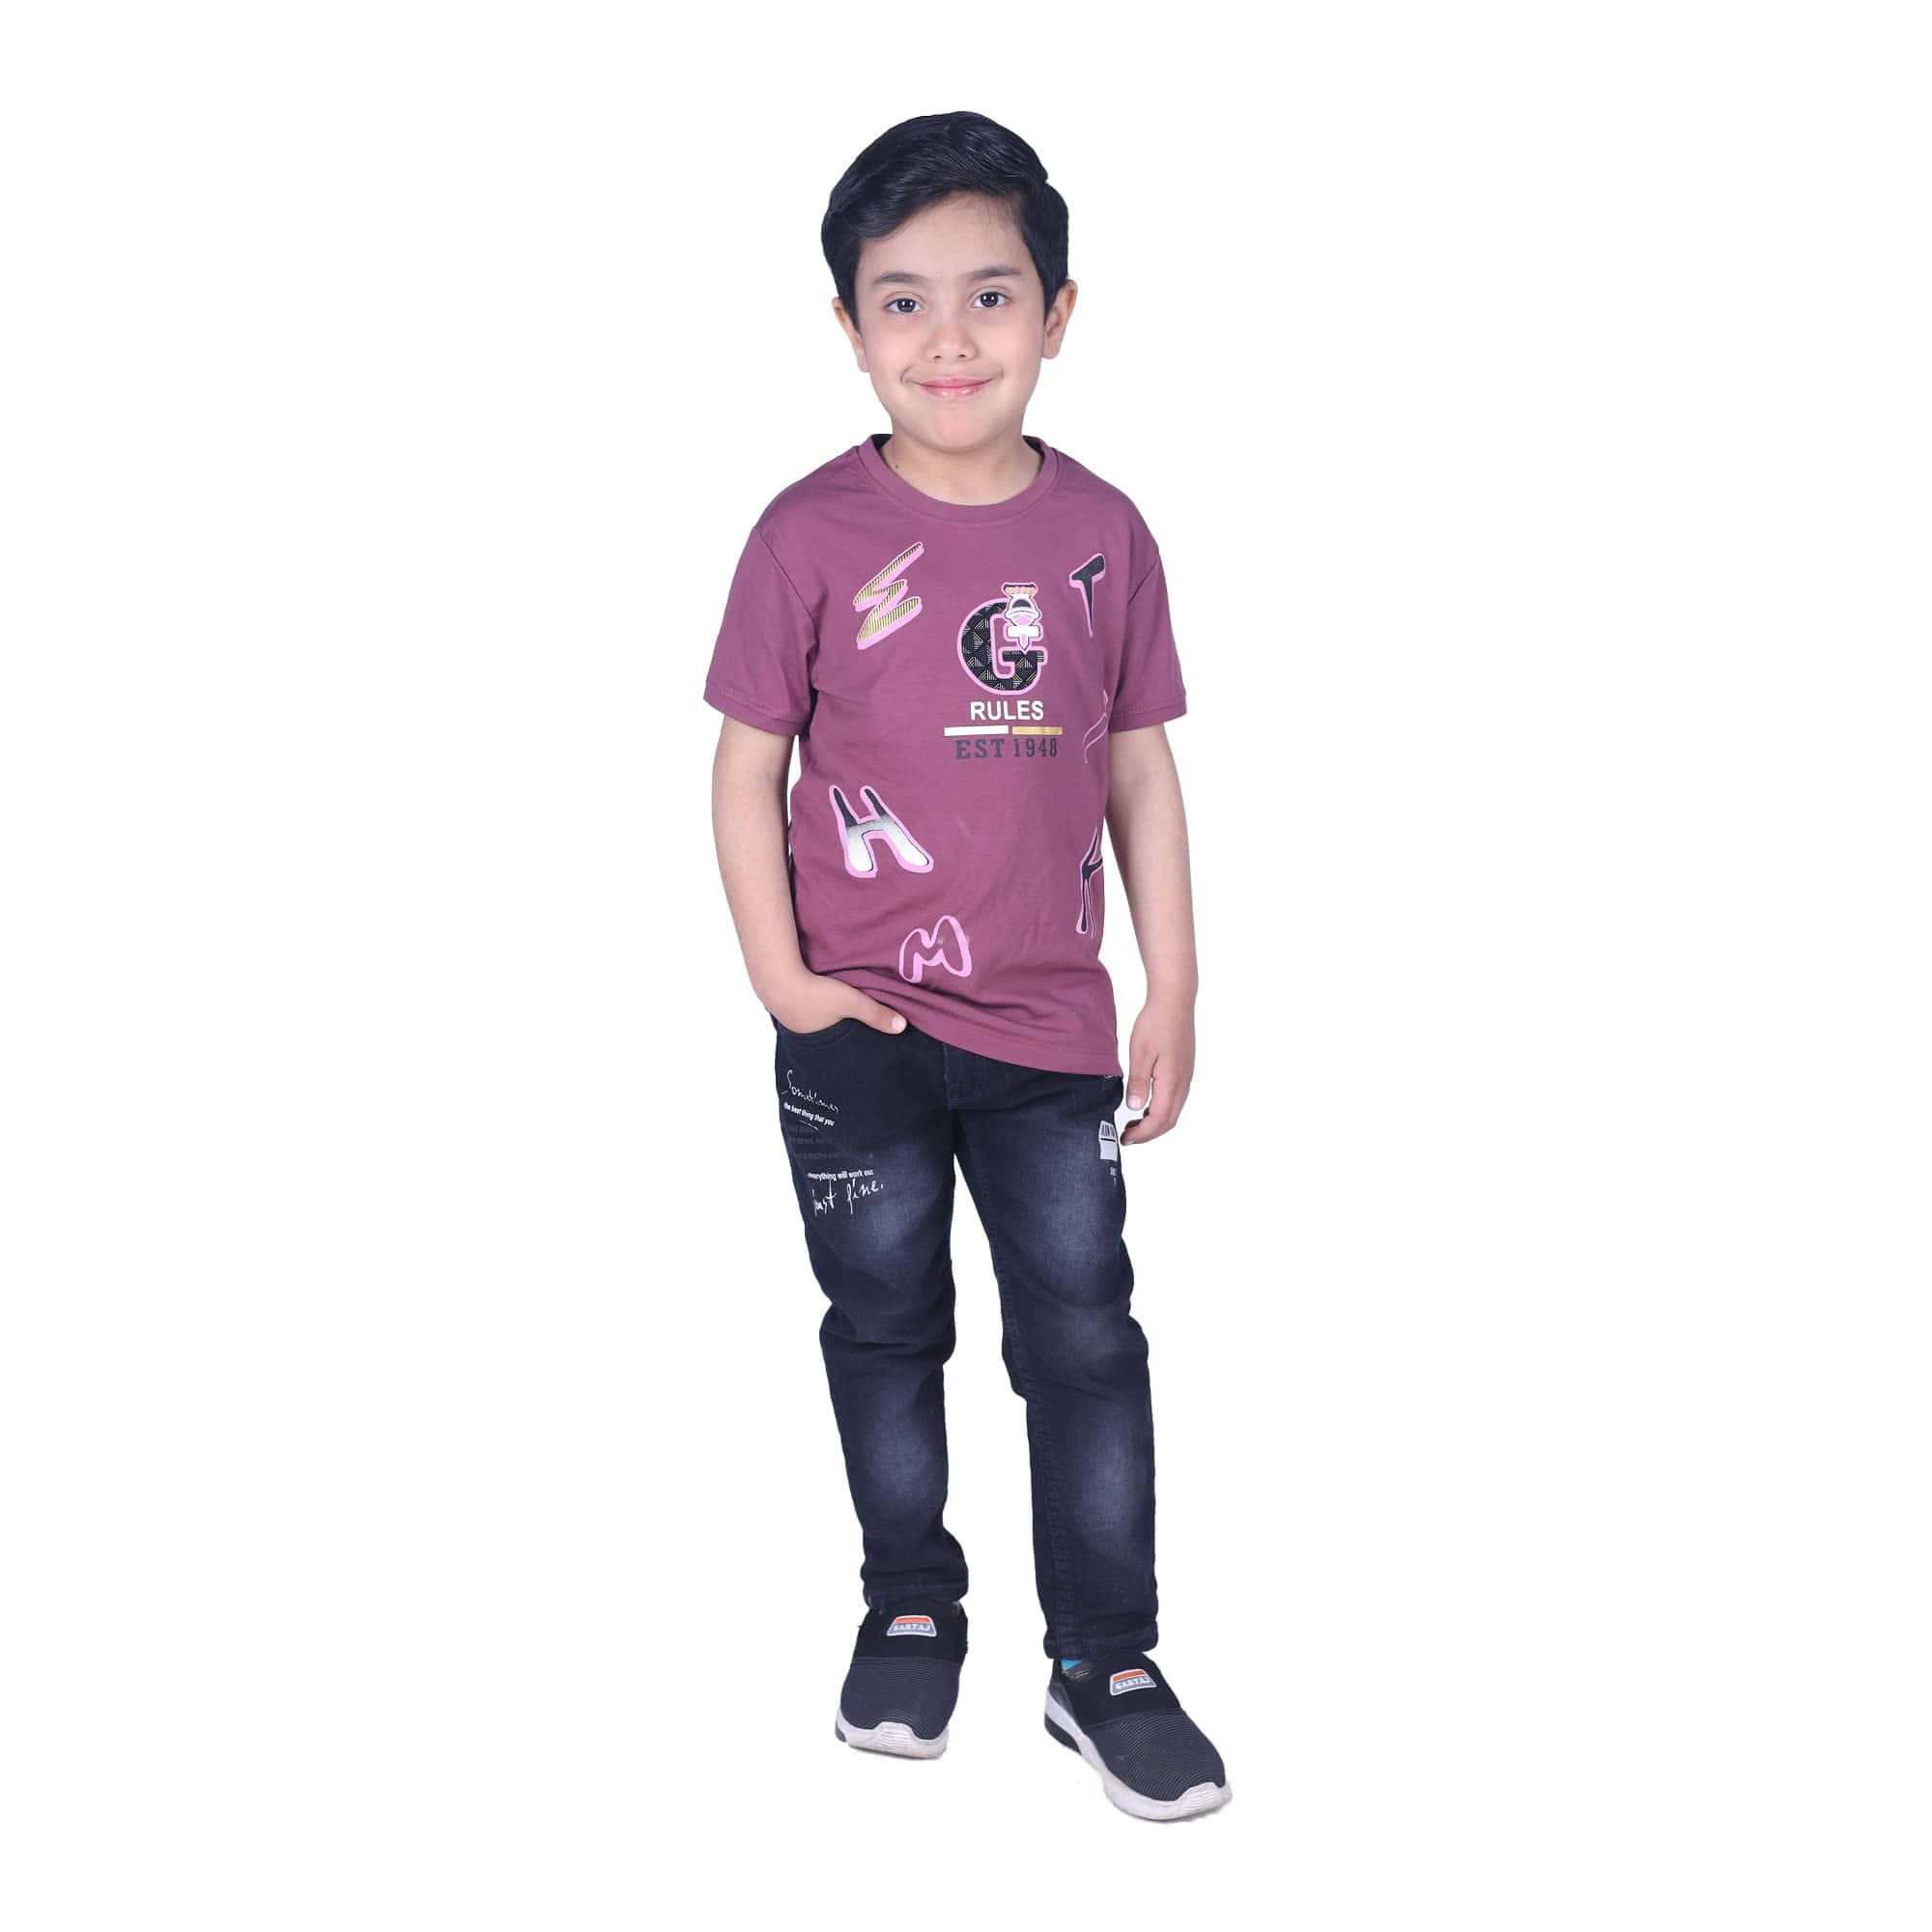 Stay in style with this classic, purple t-shirt" Wallpaper